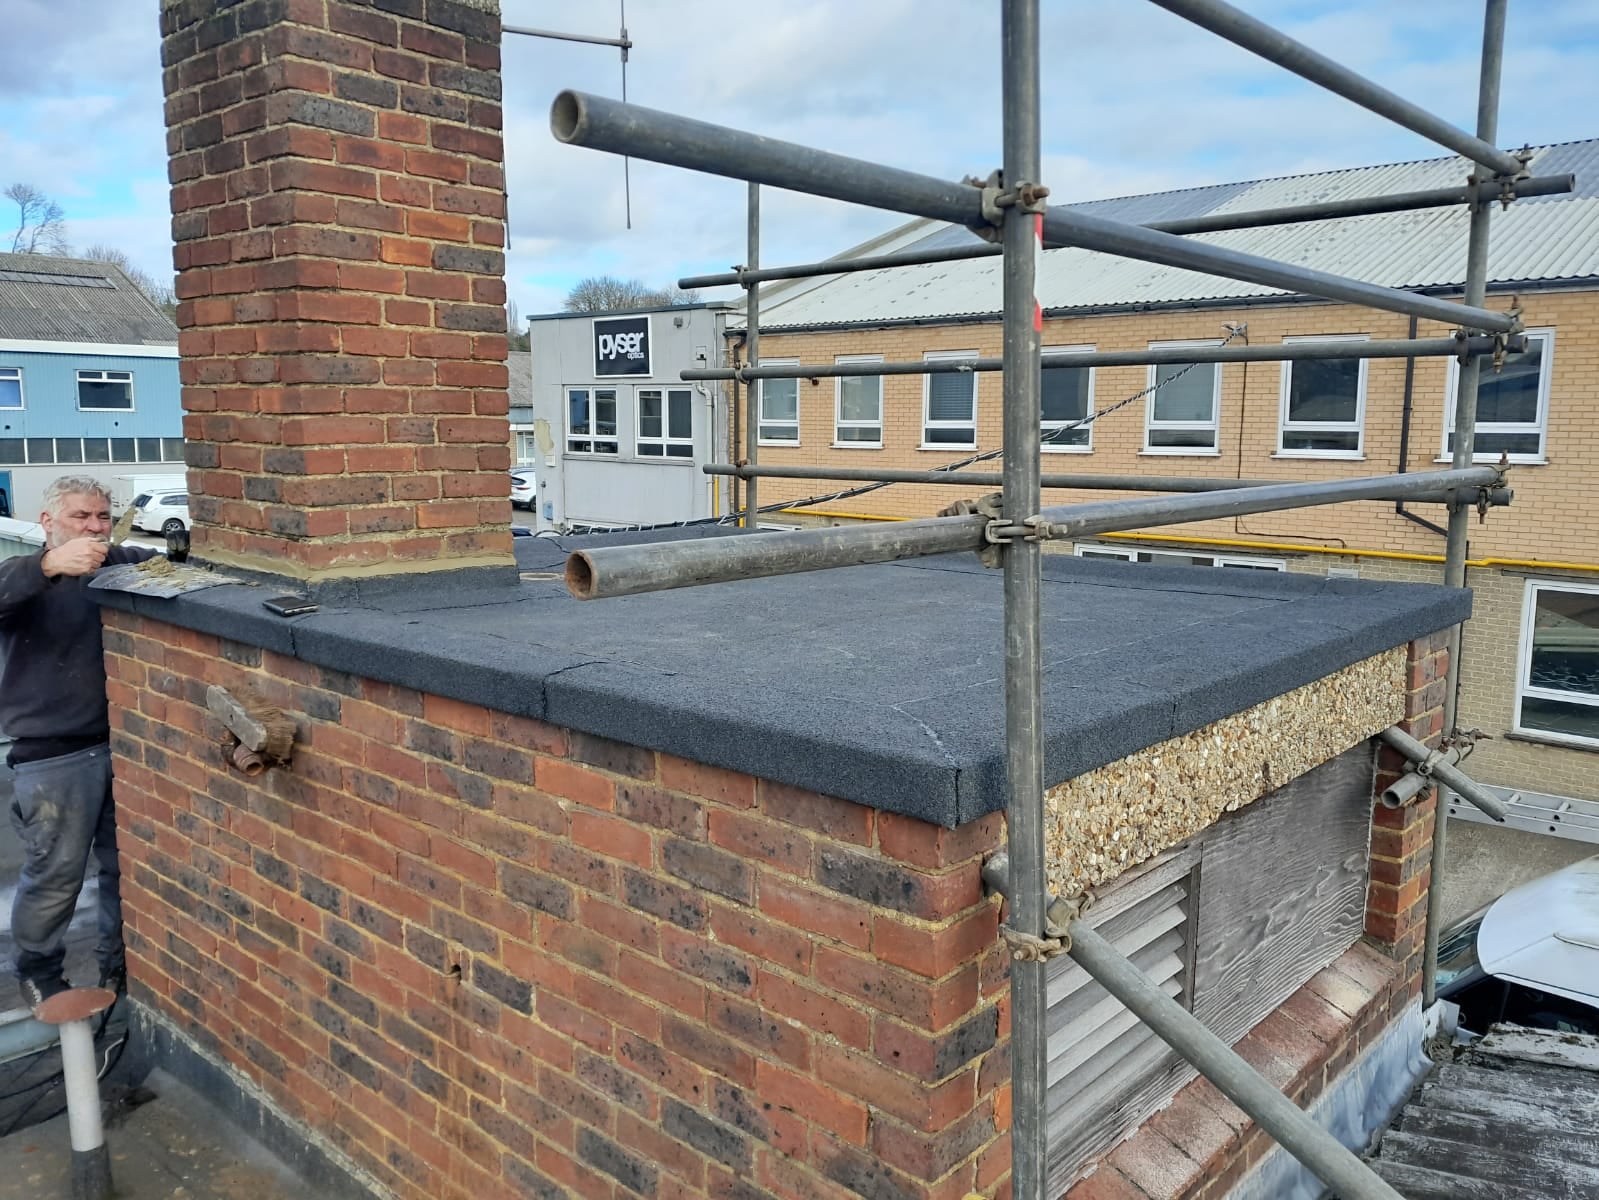 Felting contract on a tank housing roof at a factory in Edenbridge Kent